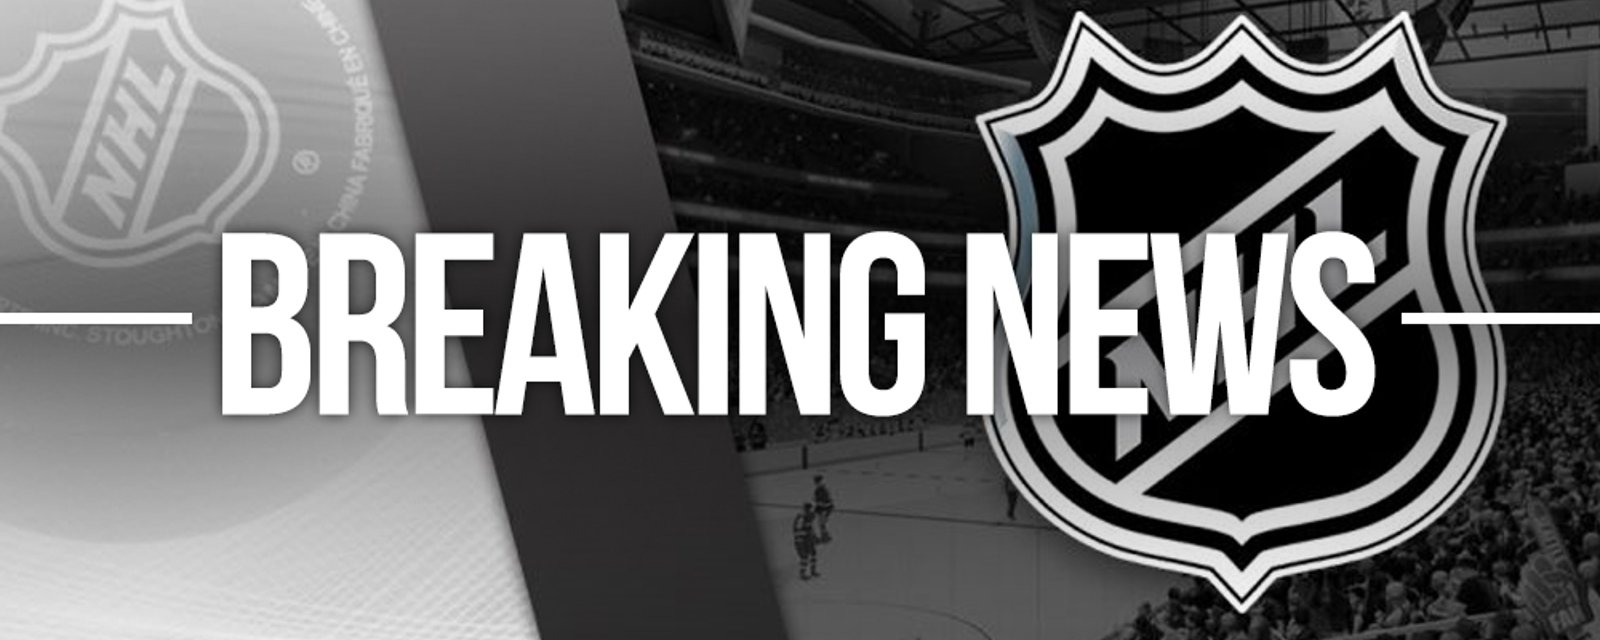 NHL issues a statement after the NBA shuts down over mass protests